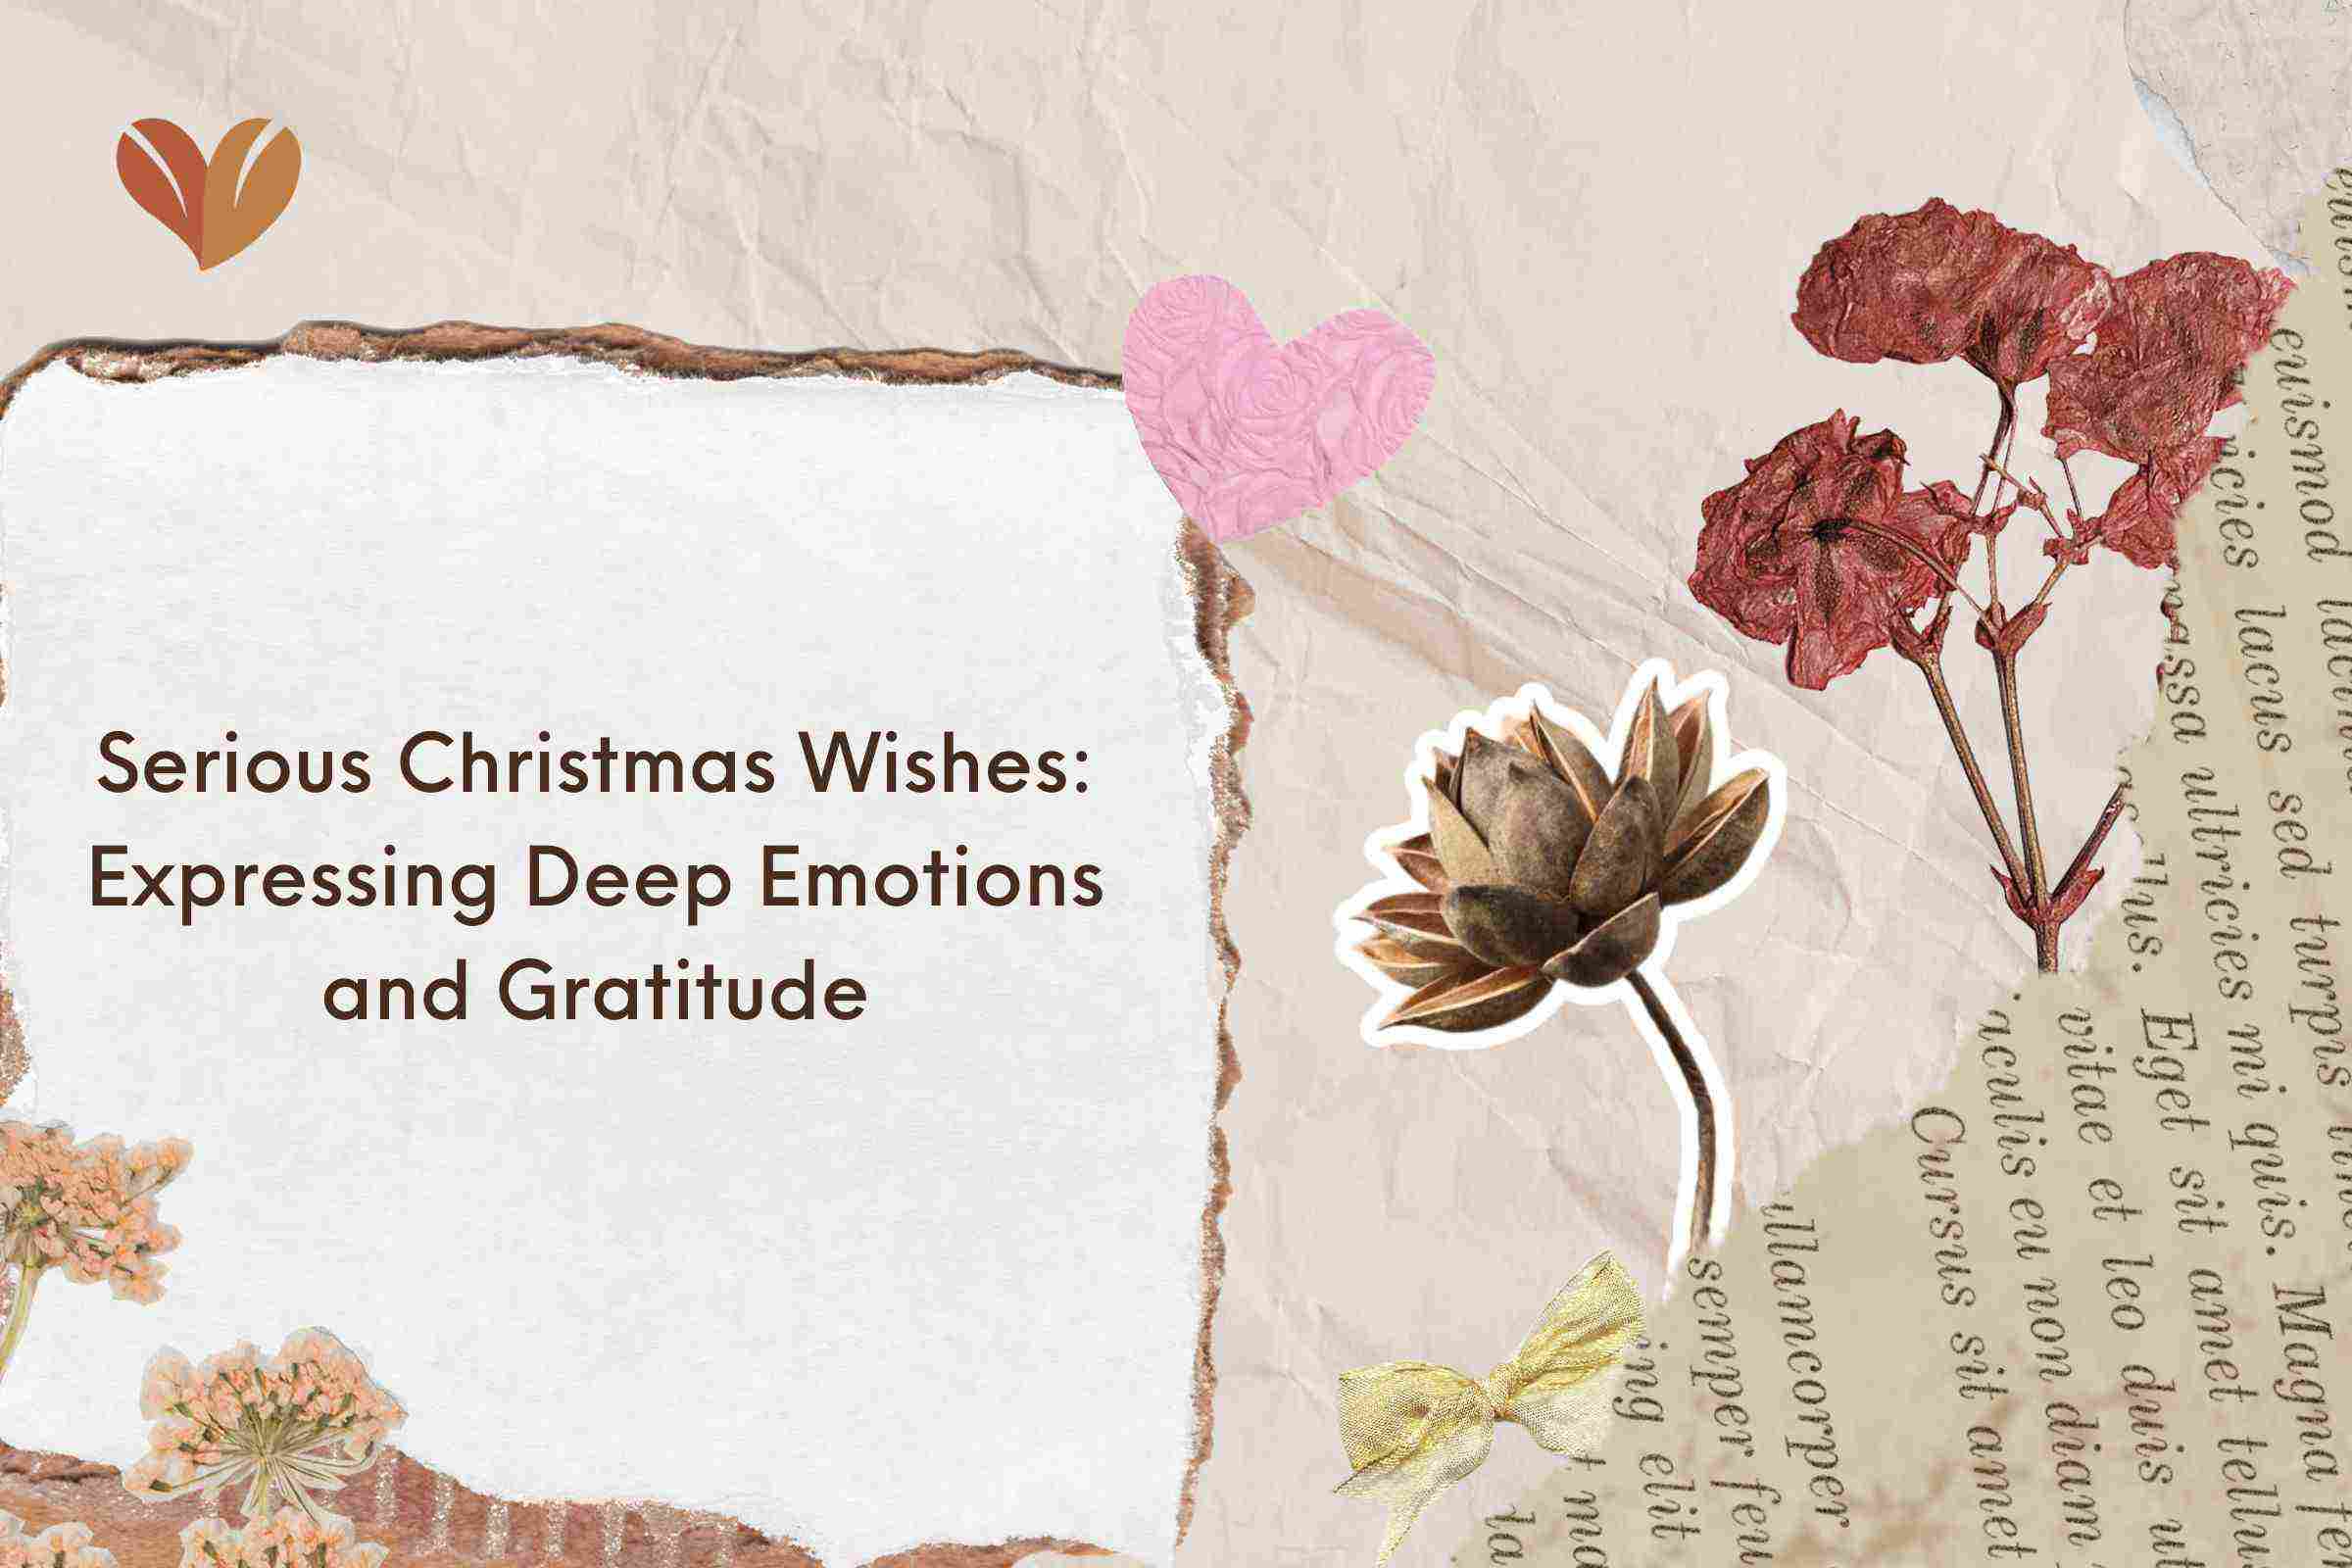 Serious Christmas Wishes: Expressing Deep Emotions and Gratitude